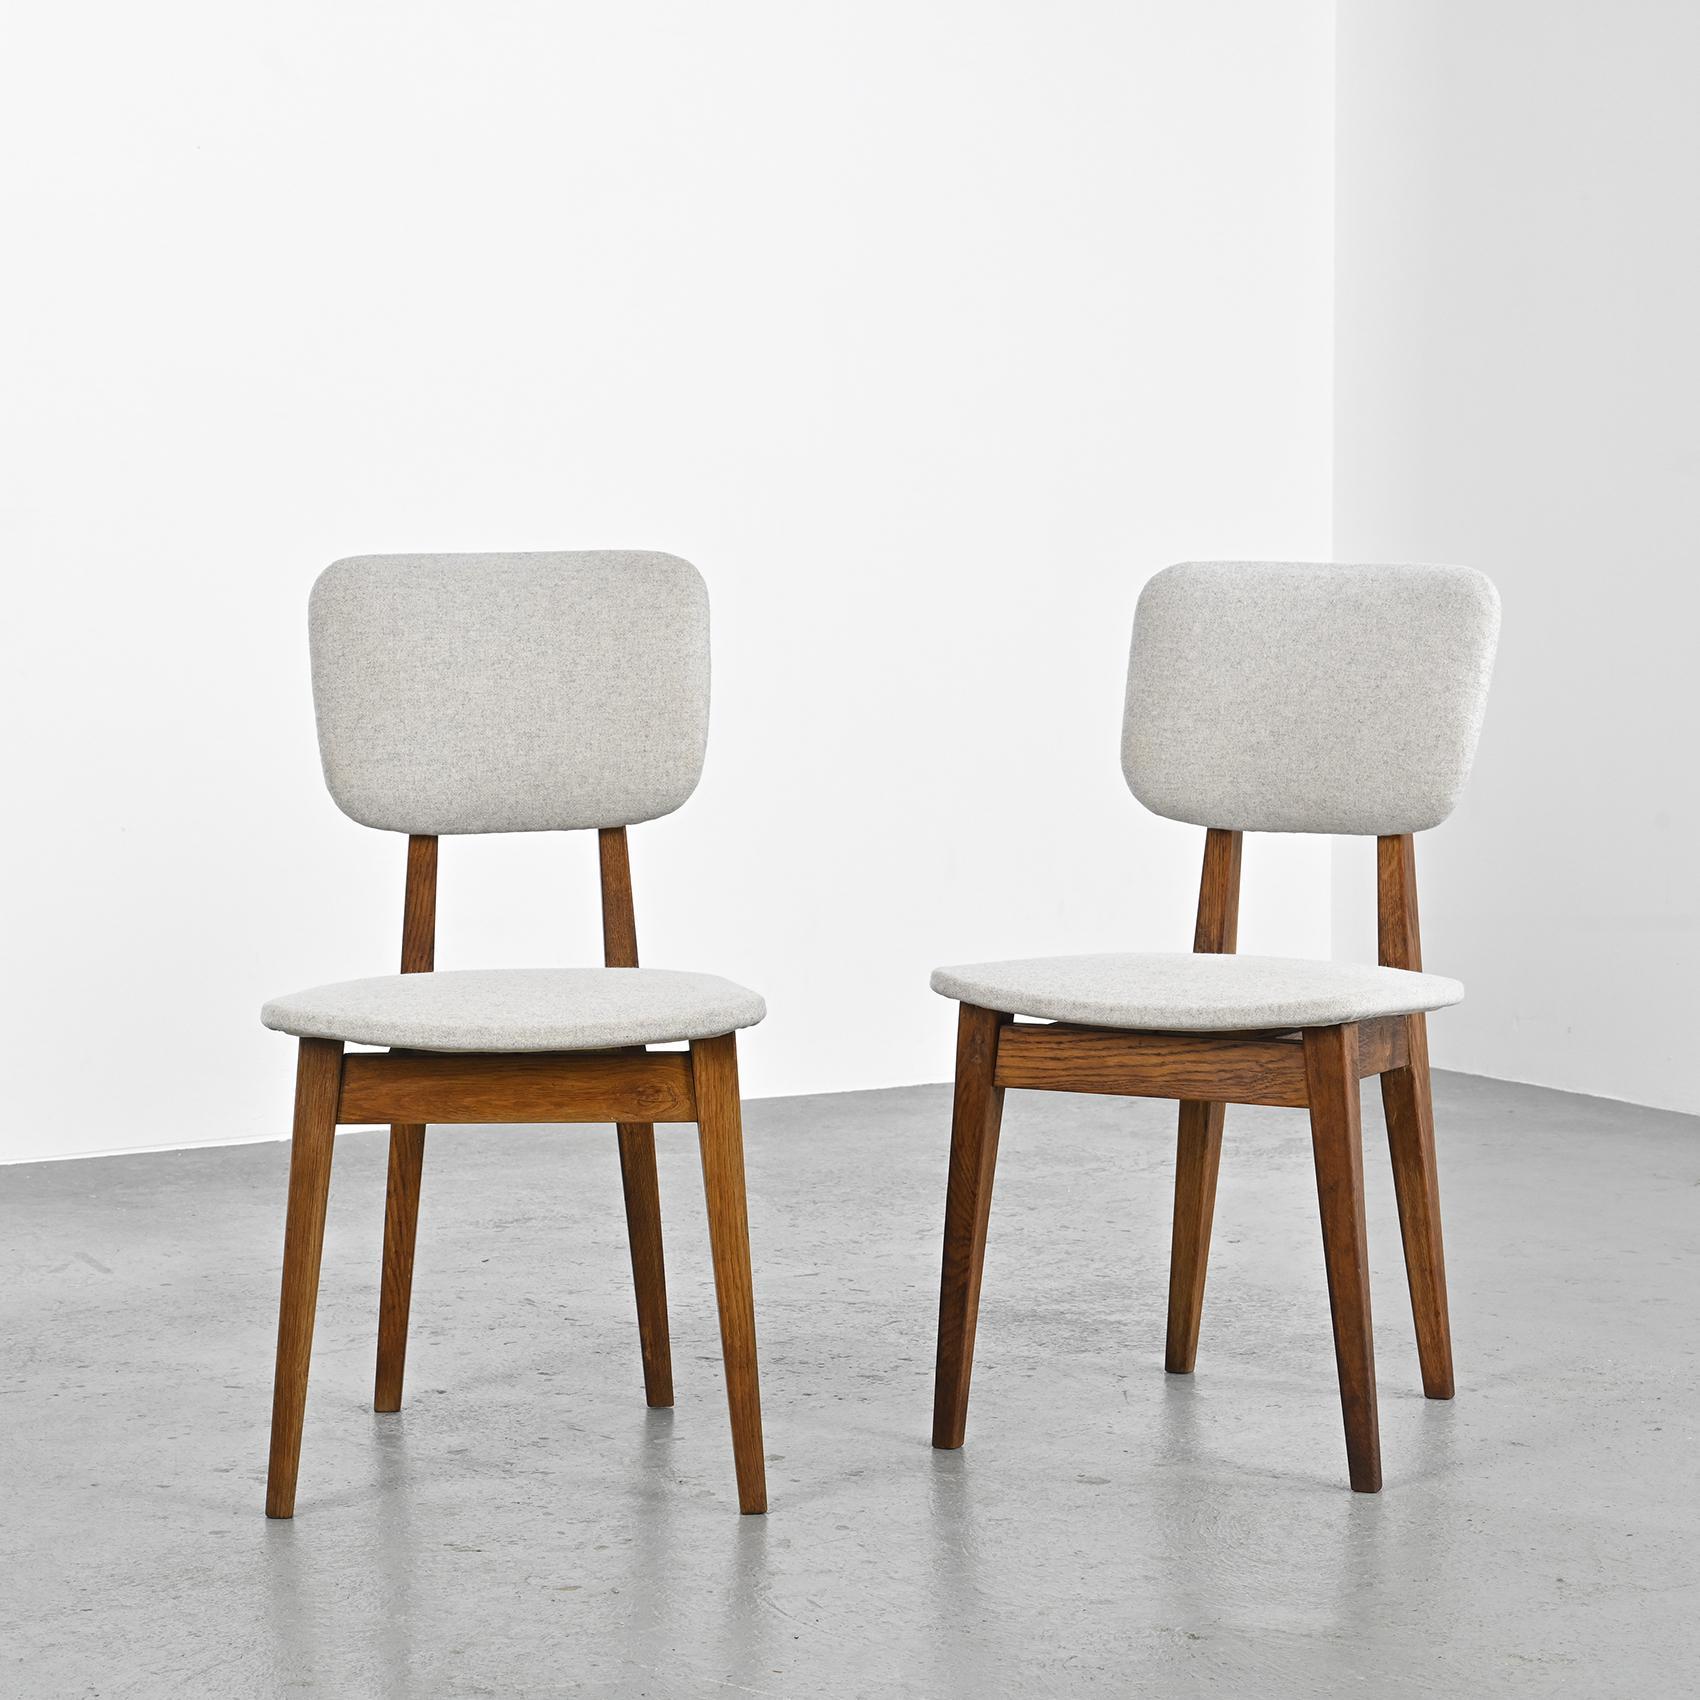 Iconic in the 1950s, the pair of Chairs Model 72, envisioned by Pierre Guariche, stands as a timeless classic.

Crafted with a solid ash frame, these chairs boast a seat and backrest reupholstered in Maison Nobilis's gray cotton